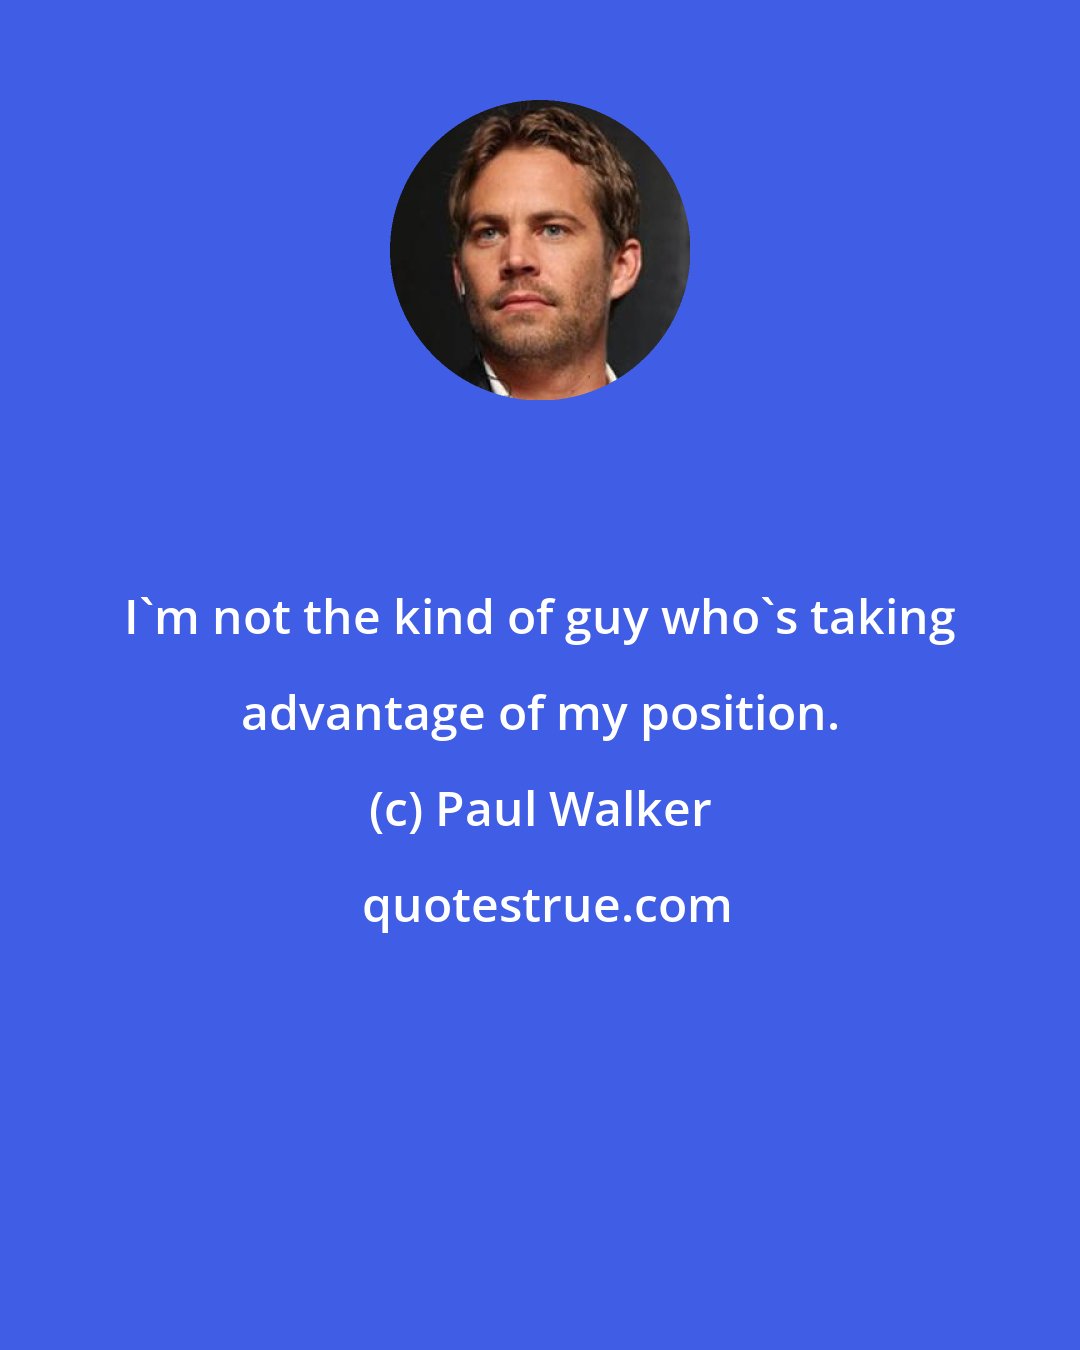 Paul Walker: I'm not the kind of guy who's taking advantage of my position.